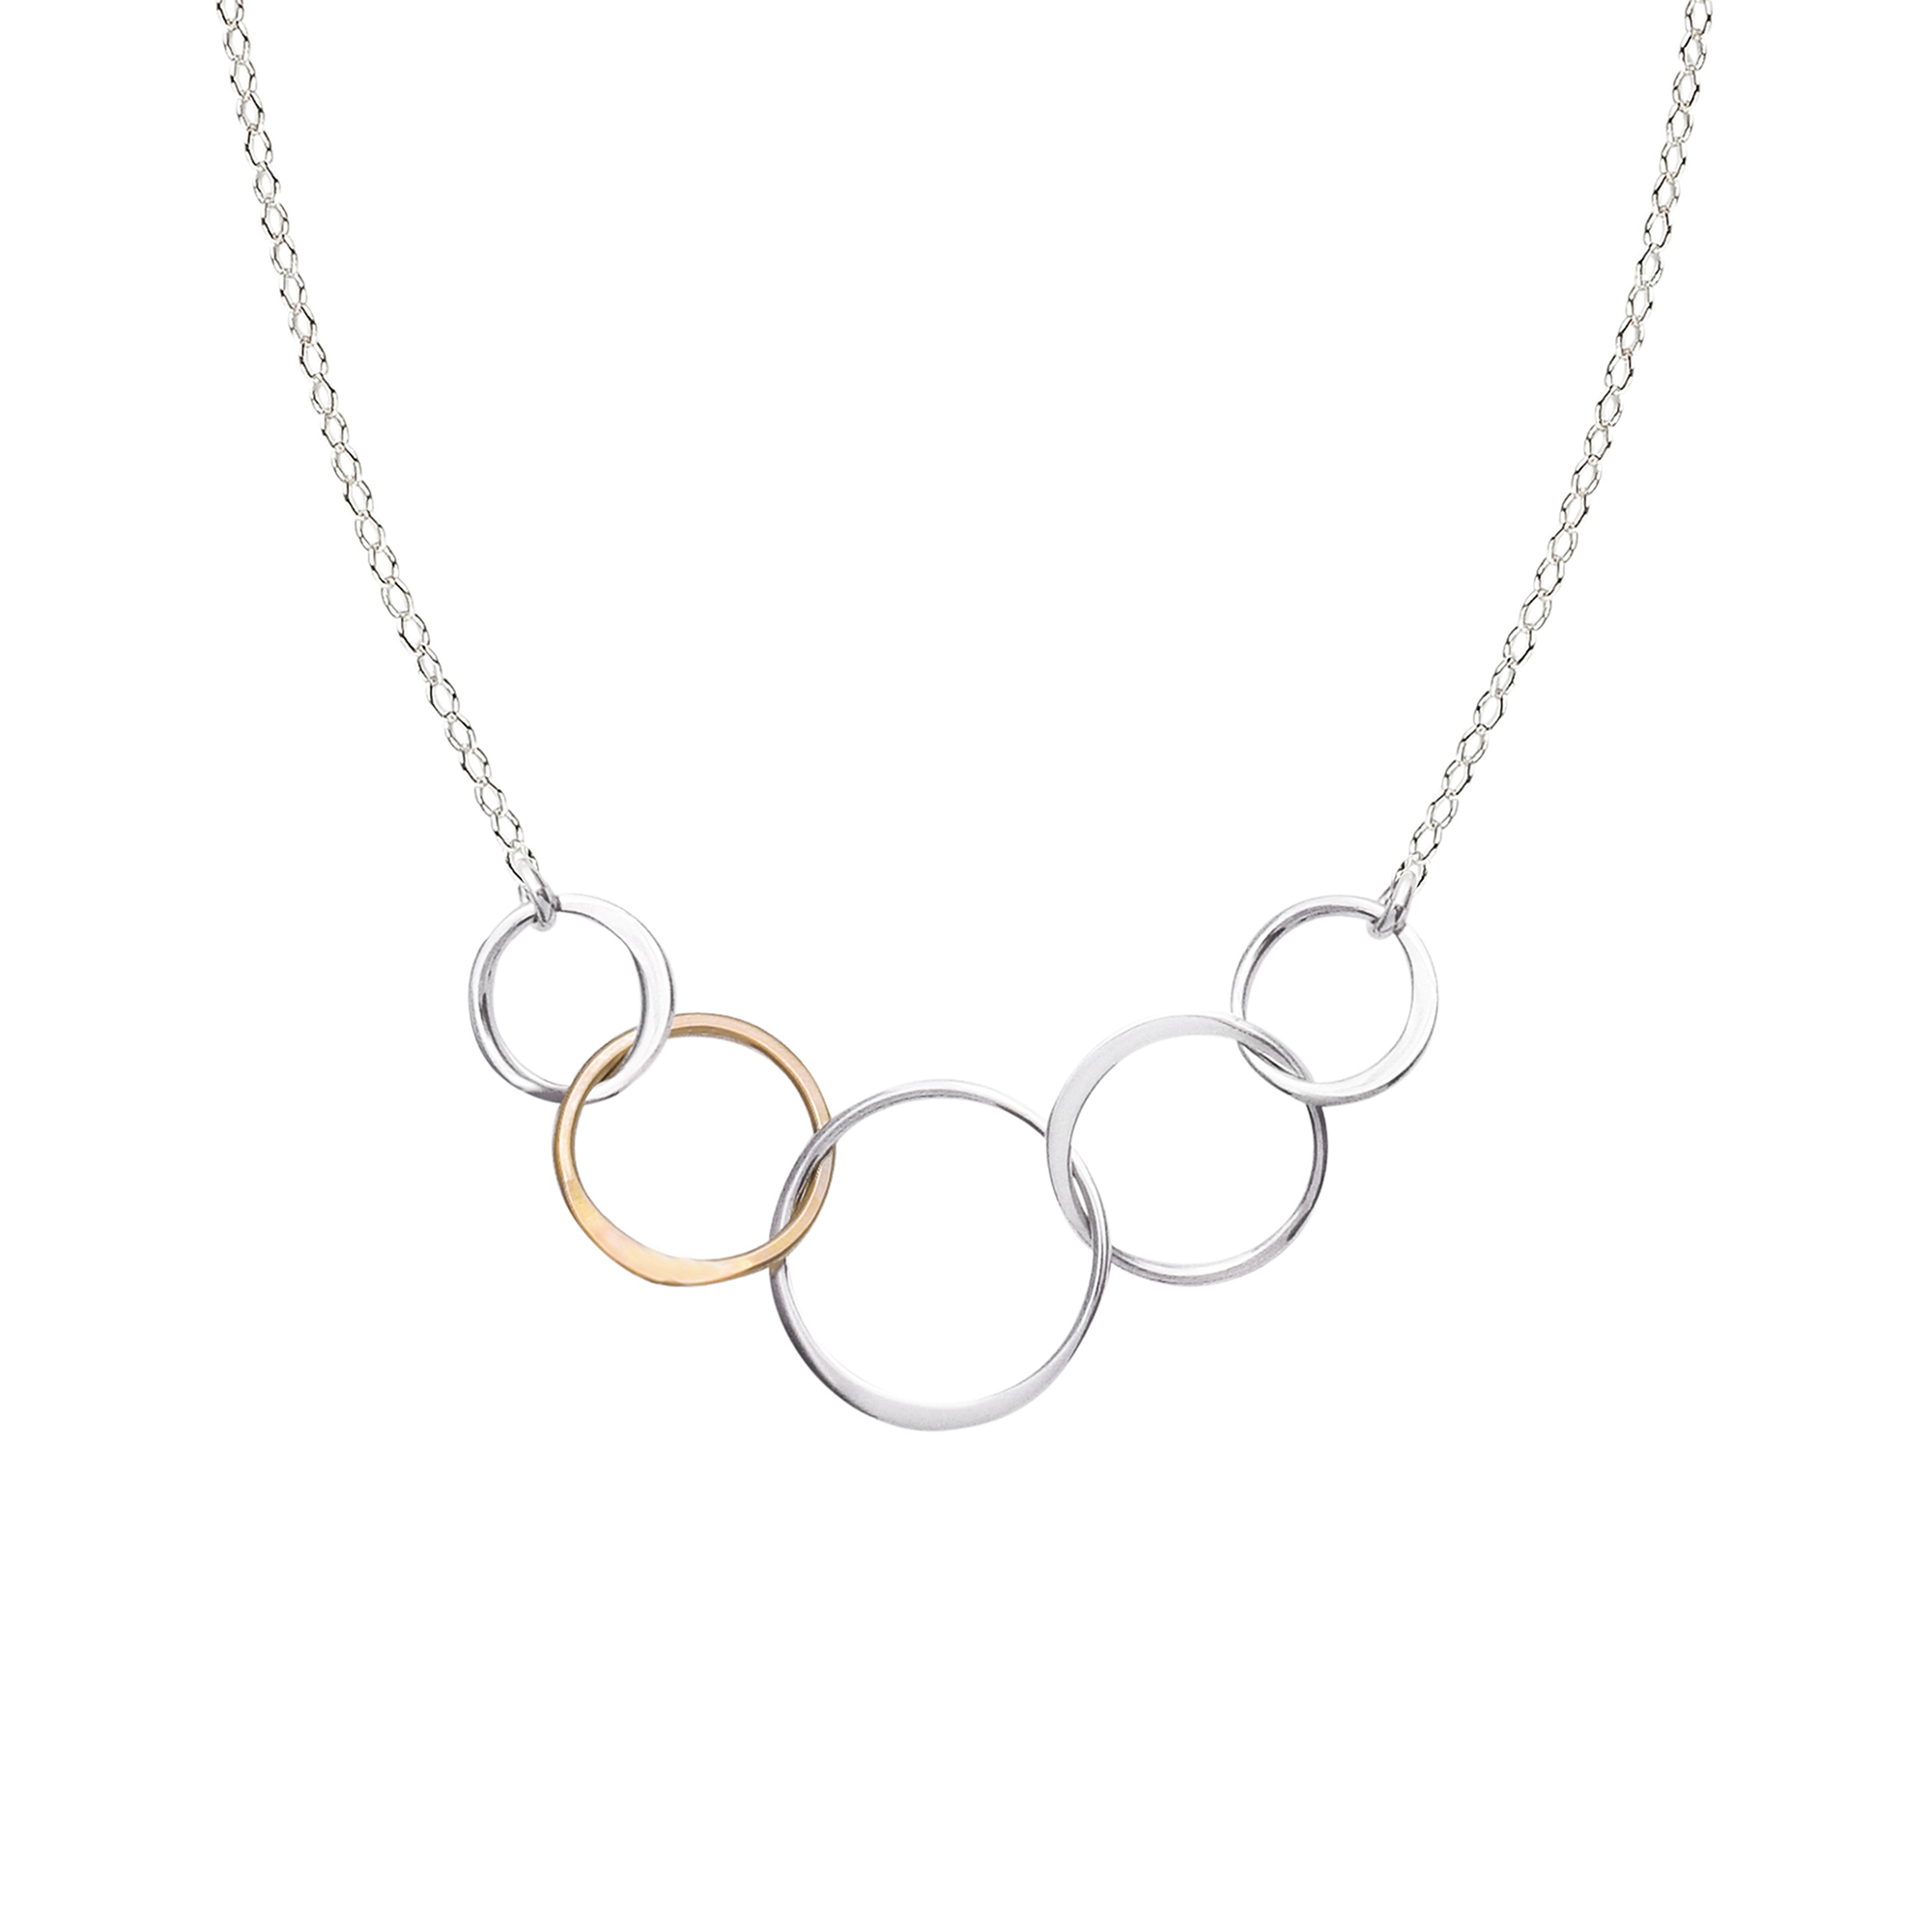 Silver & Gold Interlinked Circle Necklace | Lila Clare Jewelry 18